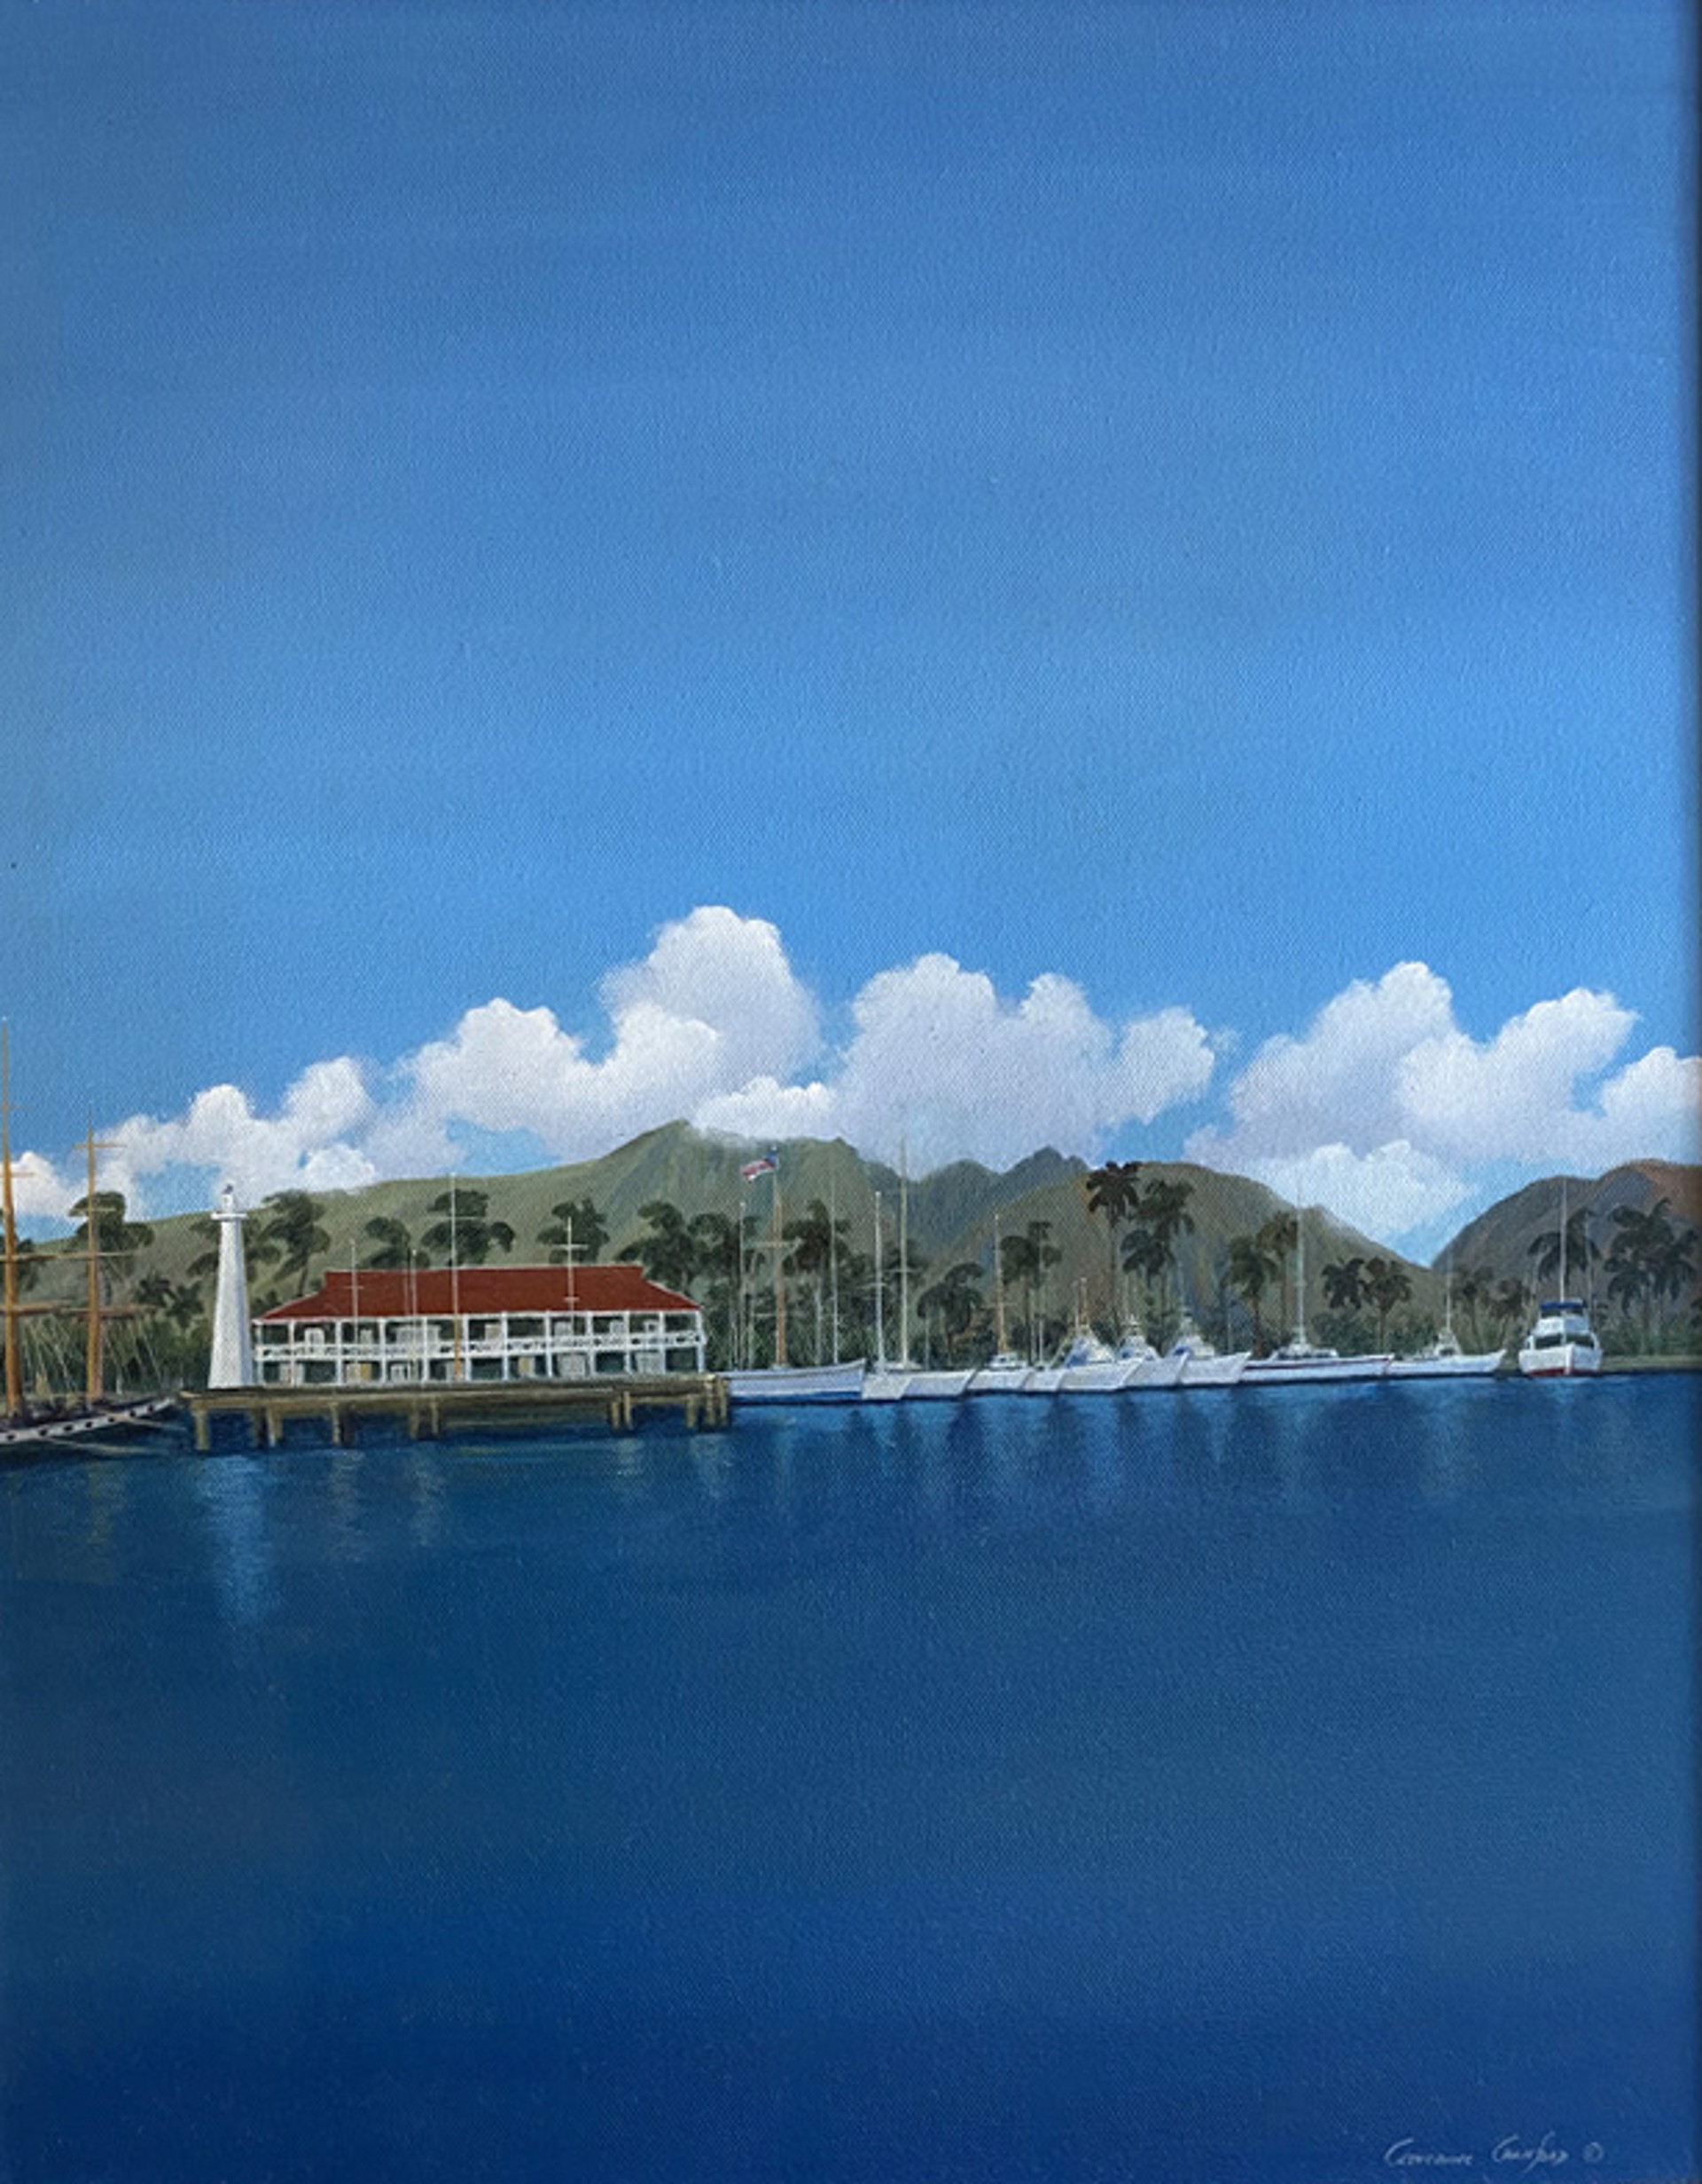 Lahaina Town by Catherine Cranford